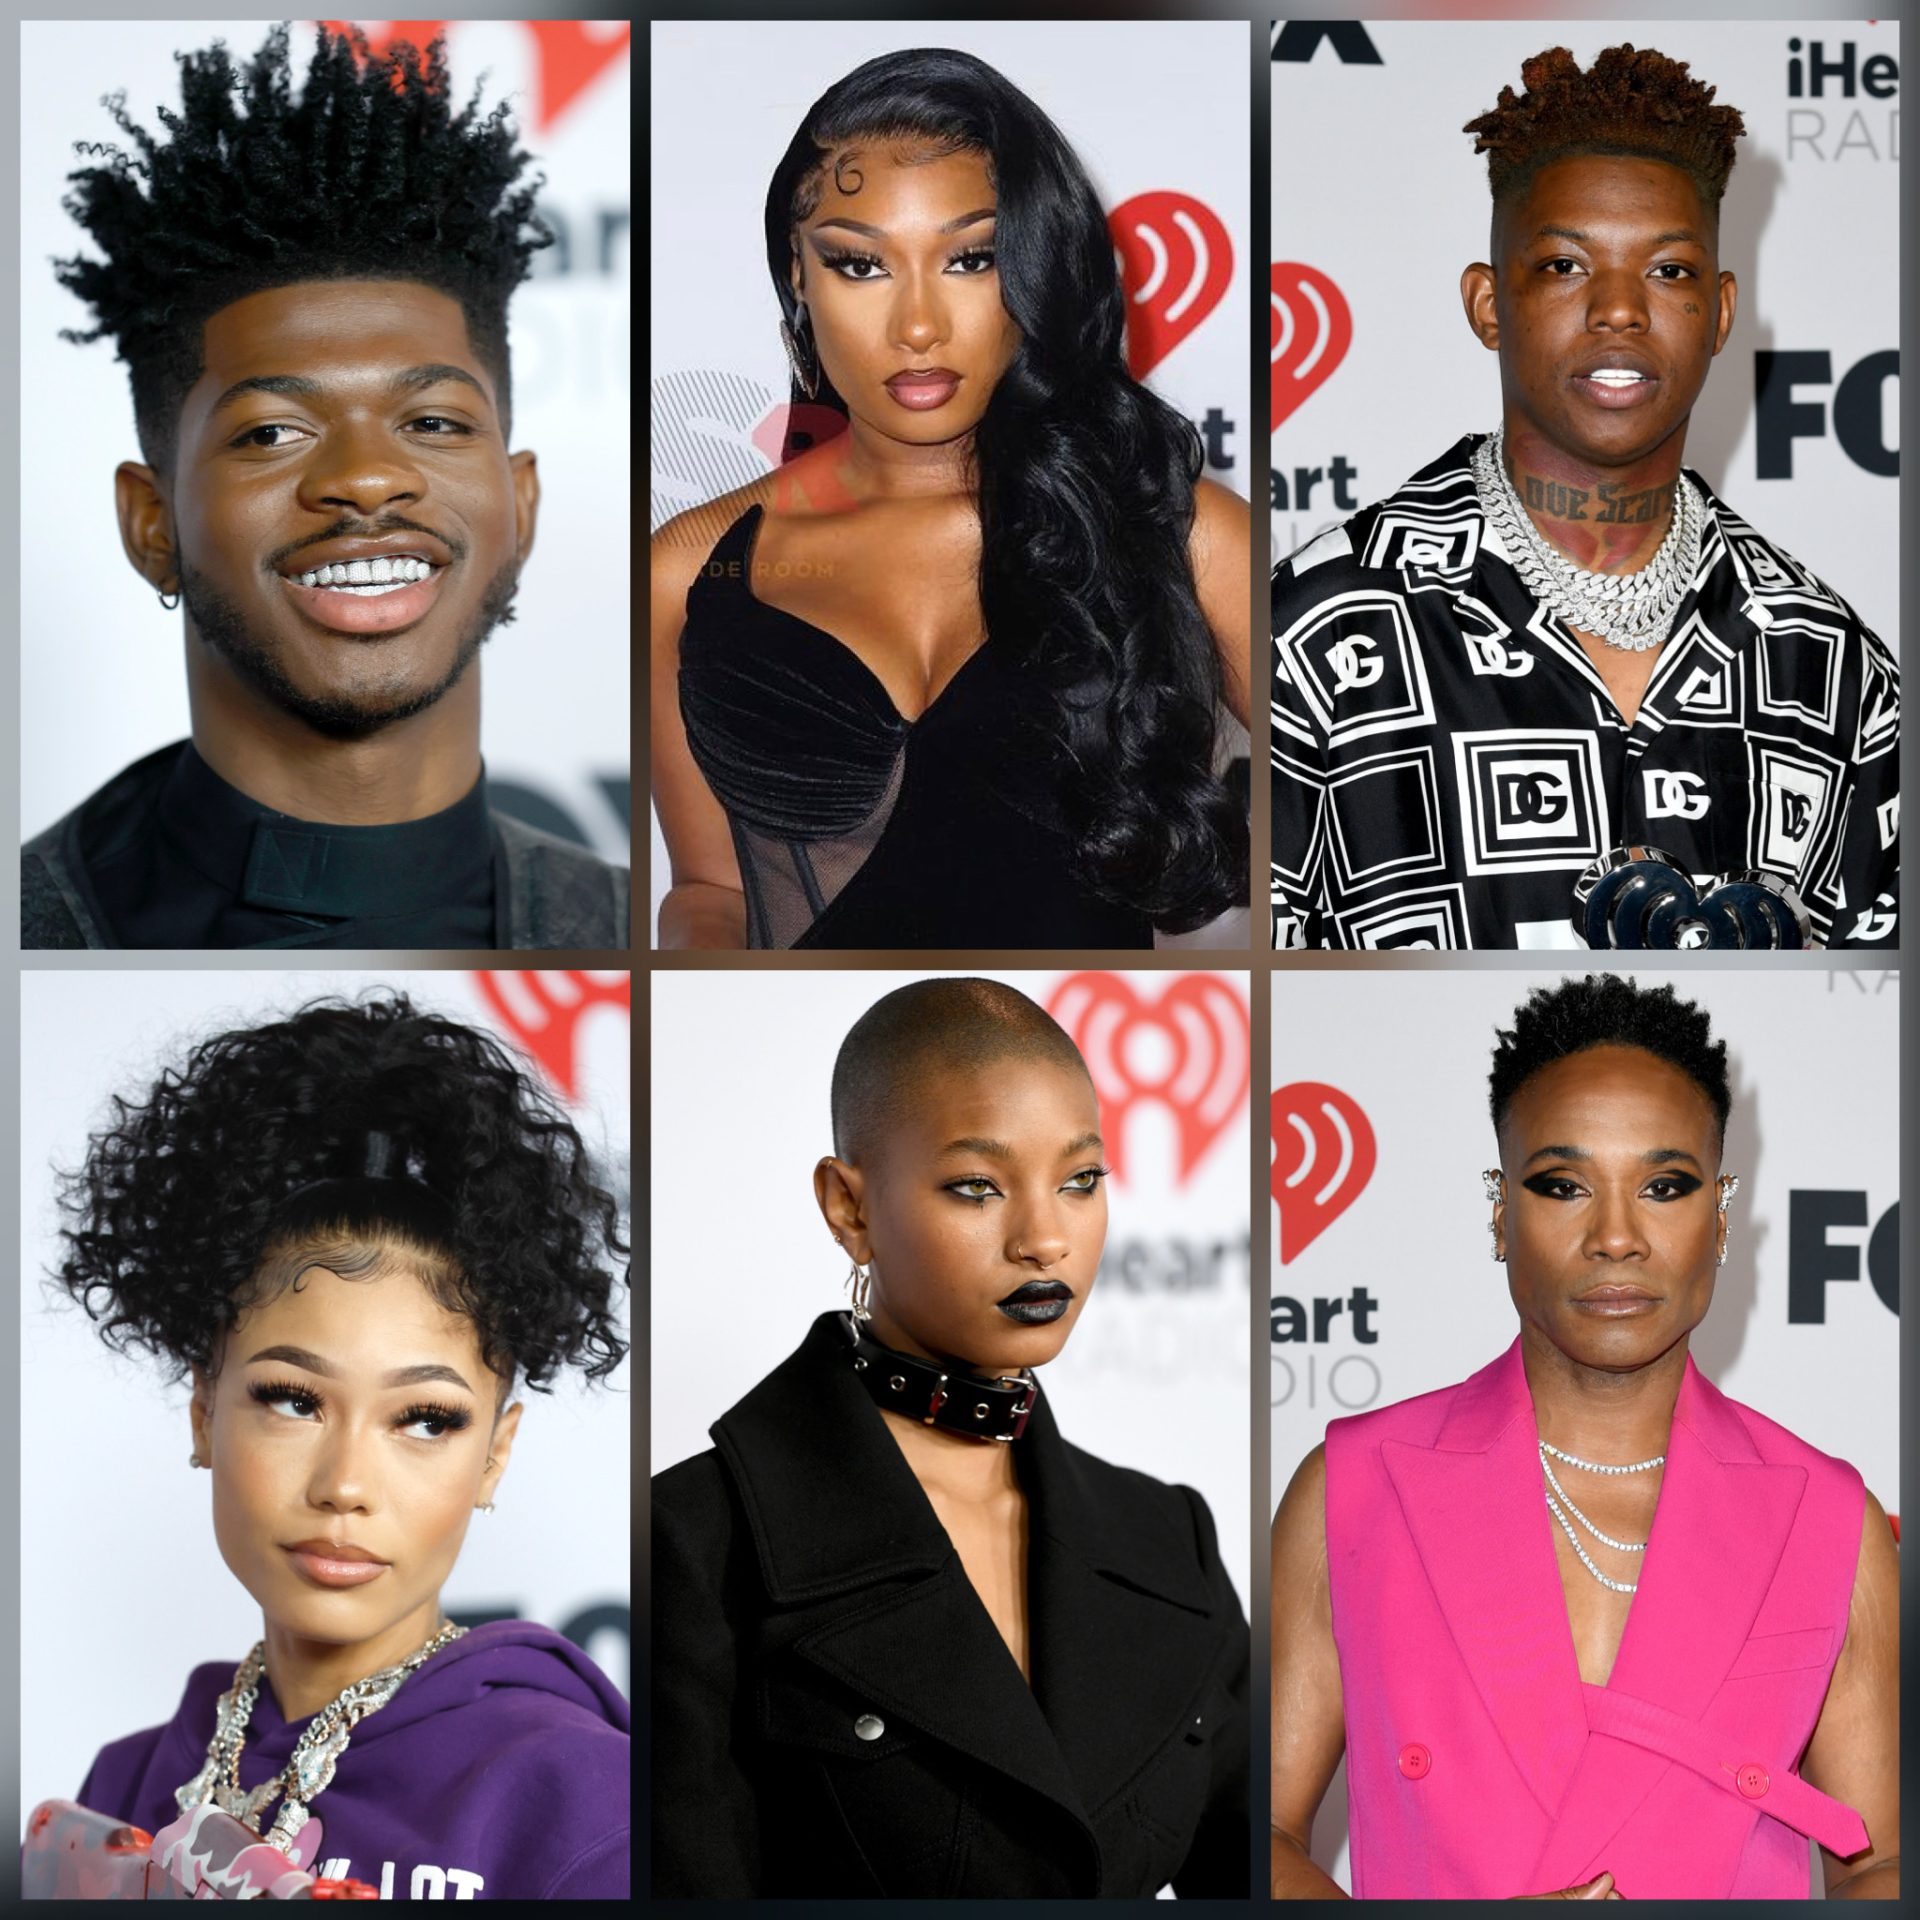 The Celebrities Brought The Heat On The Red Carpet At The iHeartRadio Music Awards